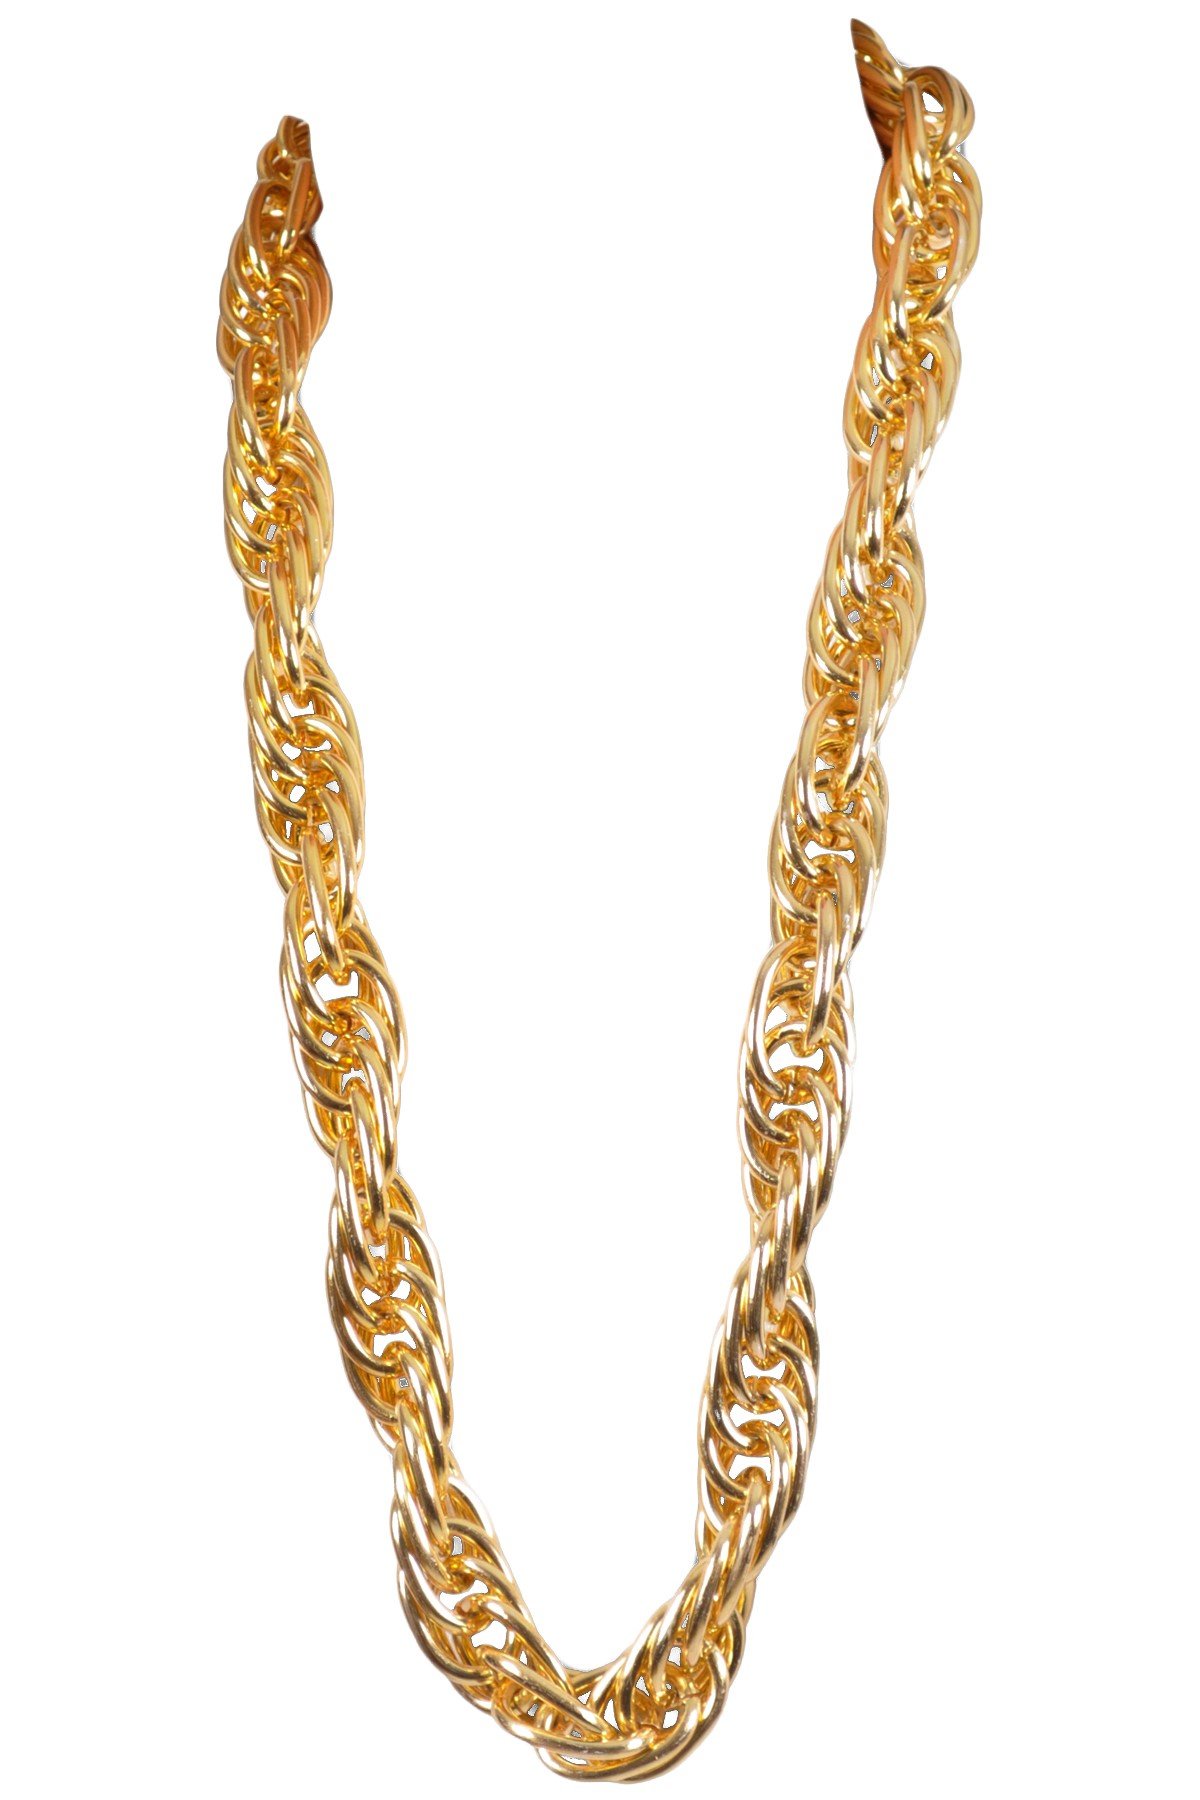 Arsimus 40-Inch Heavy Gold Dookie Chain for 80s and 90s Rapper Costume